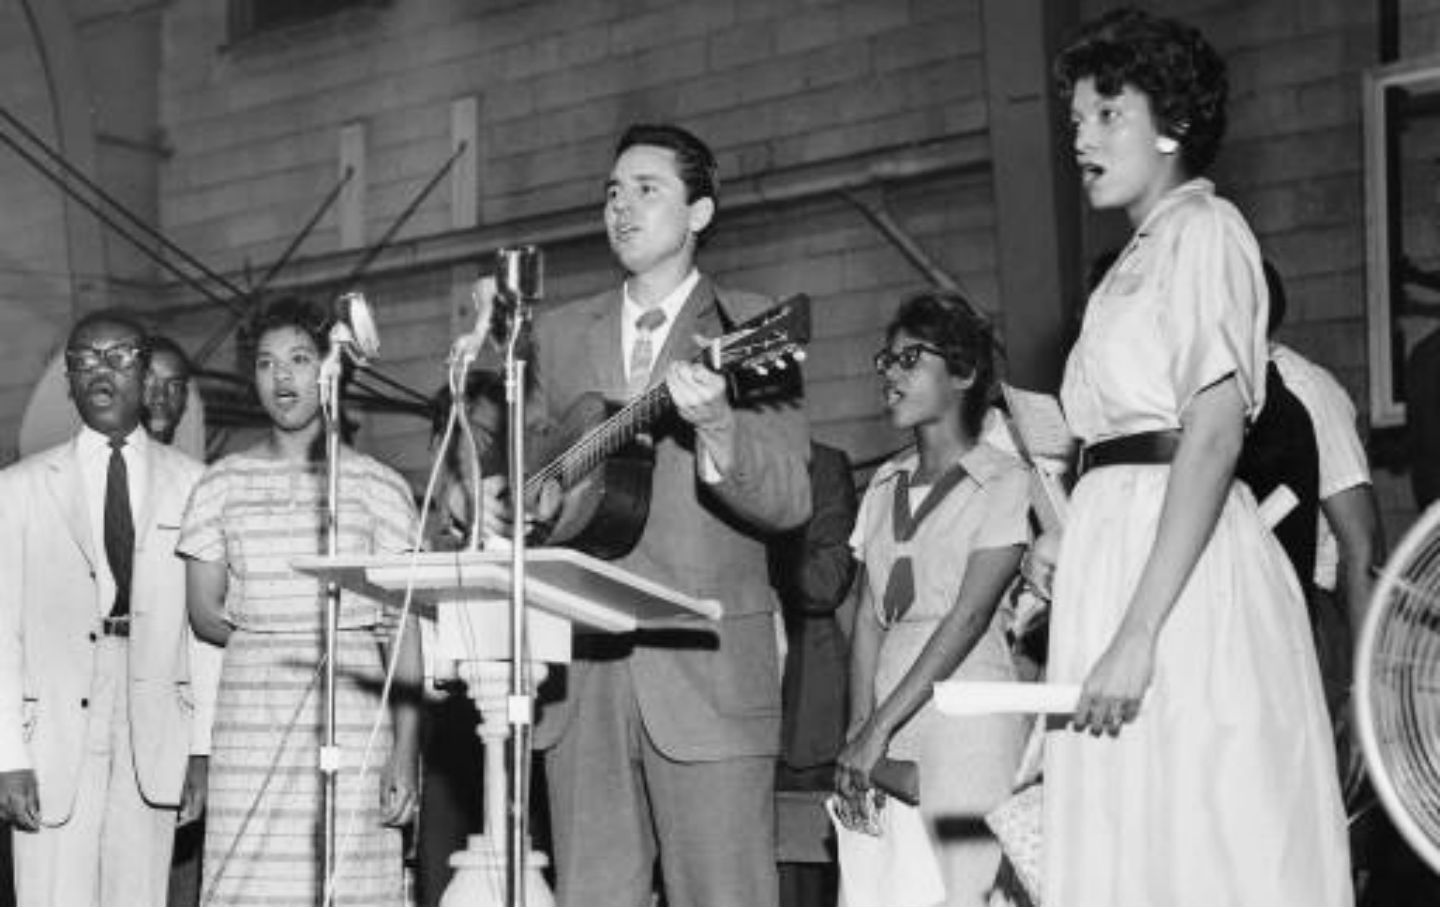 Remembering Guy Carawan: The Man Who Popularized ‘We Shall Overcome’